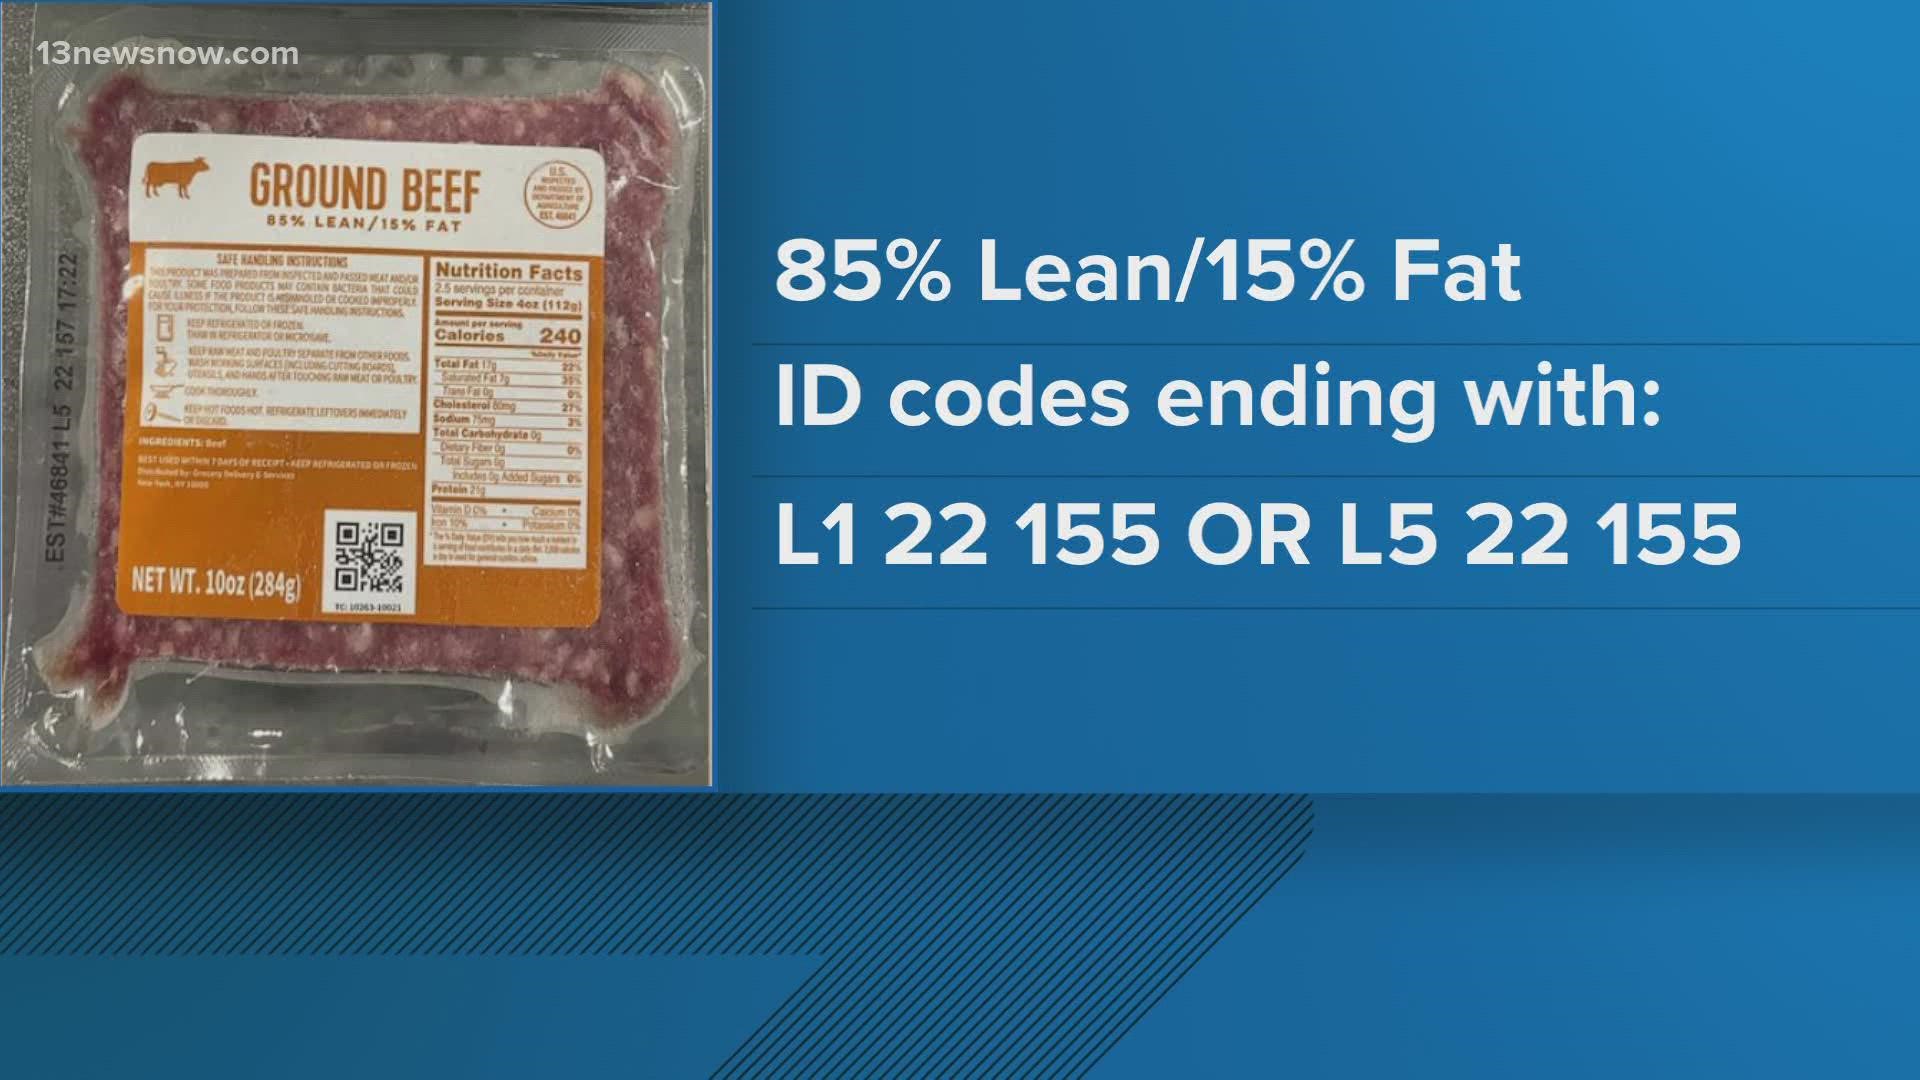 If you still have any of the beef shipped in July, you need to trash it. It could be contaminated with E. coli.